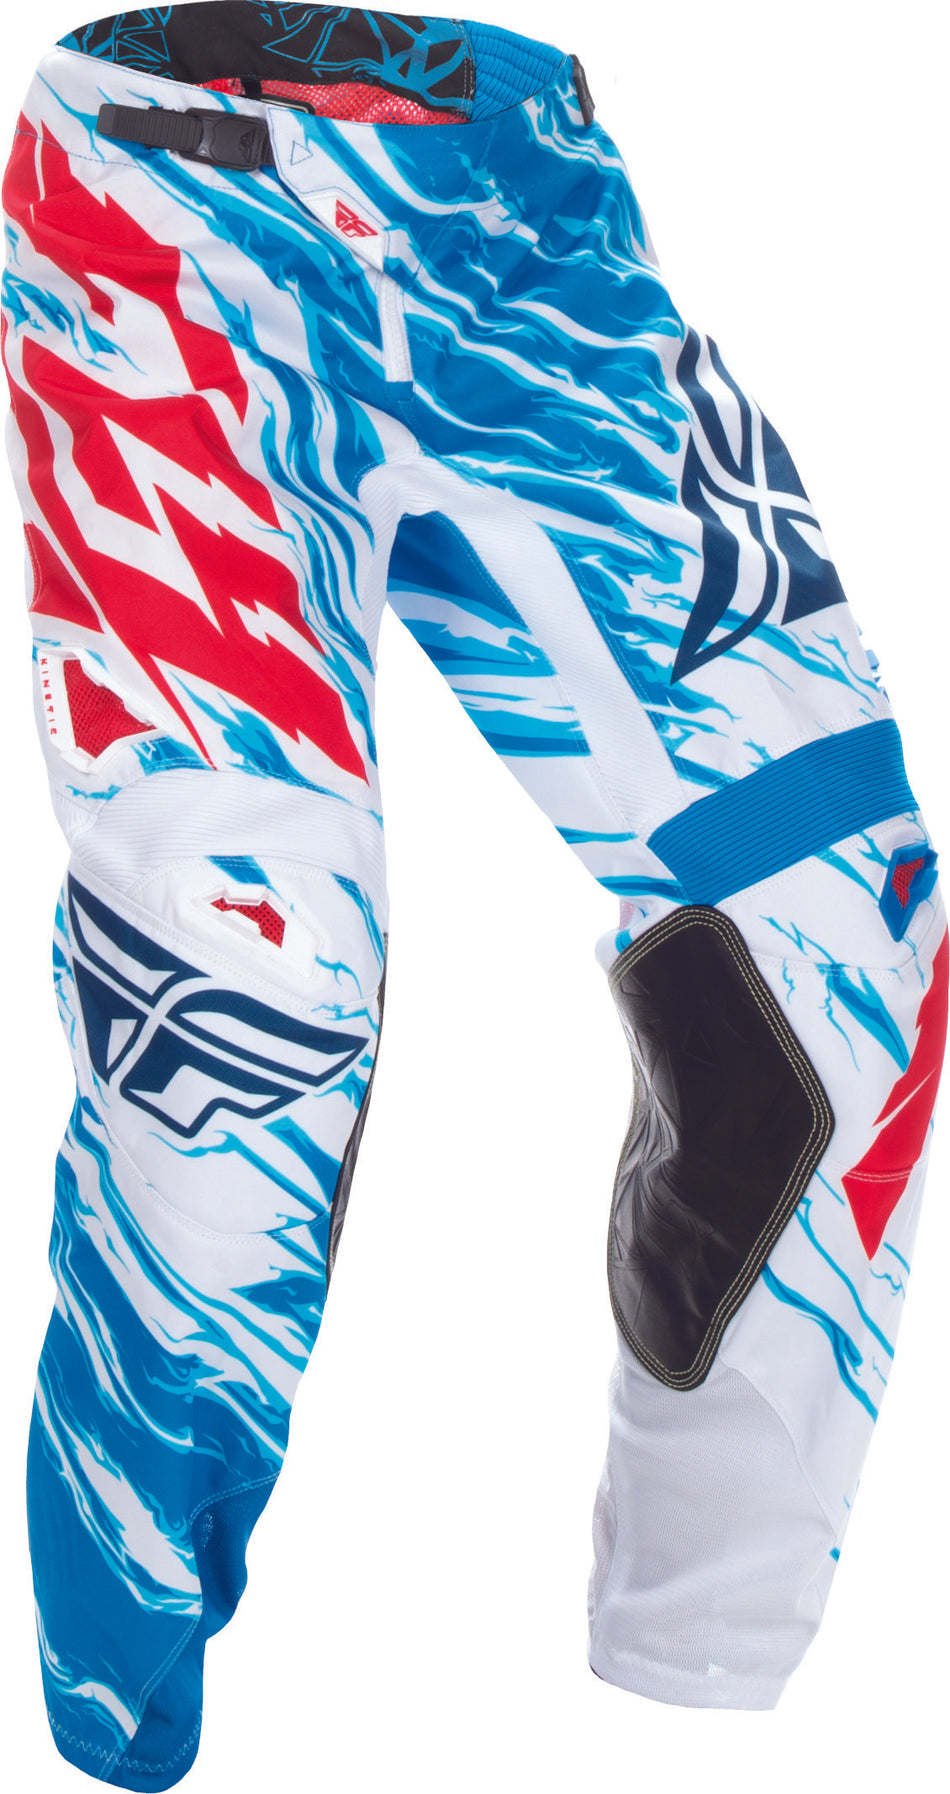 FLY RACING Kinetic Relapse Pant Red/White/Blue Sz 32 370-43232